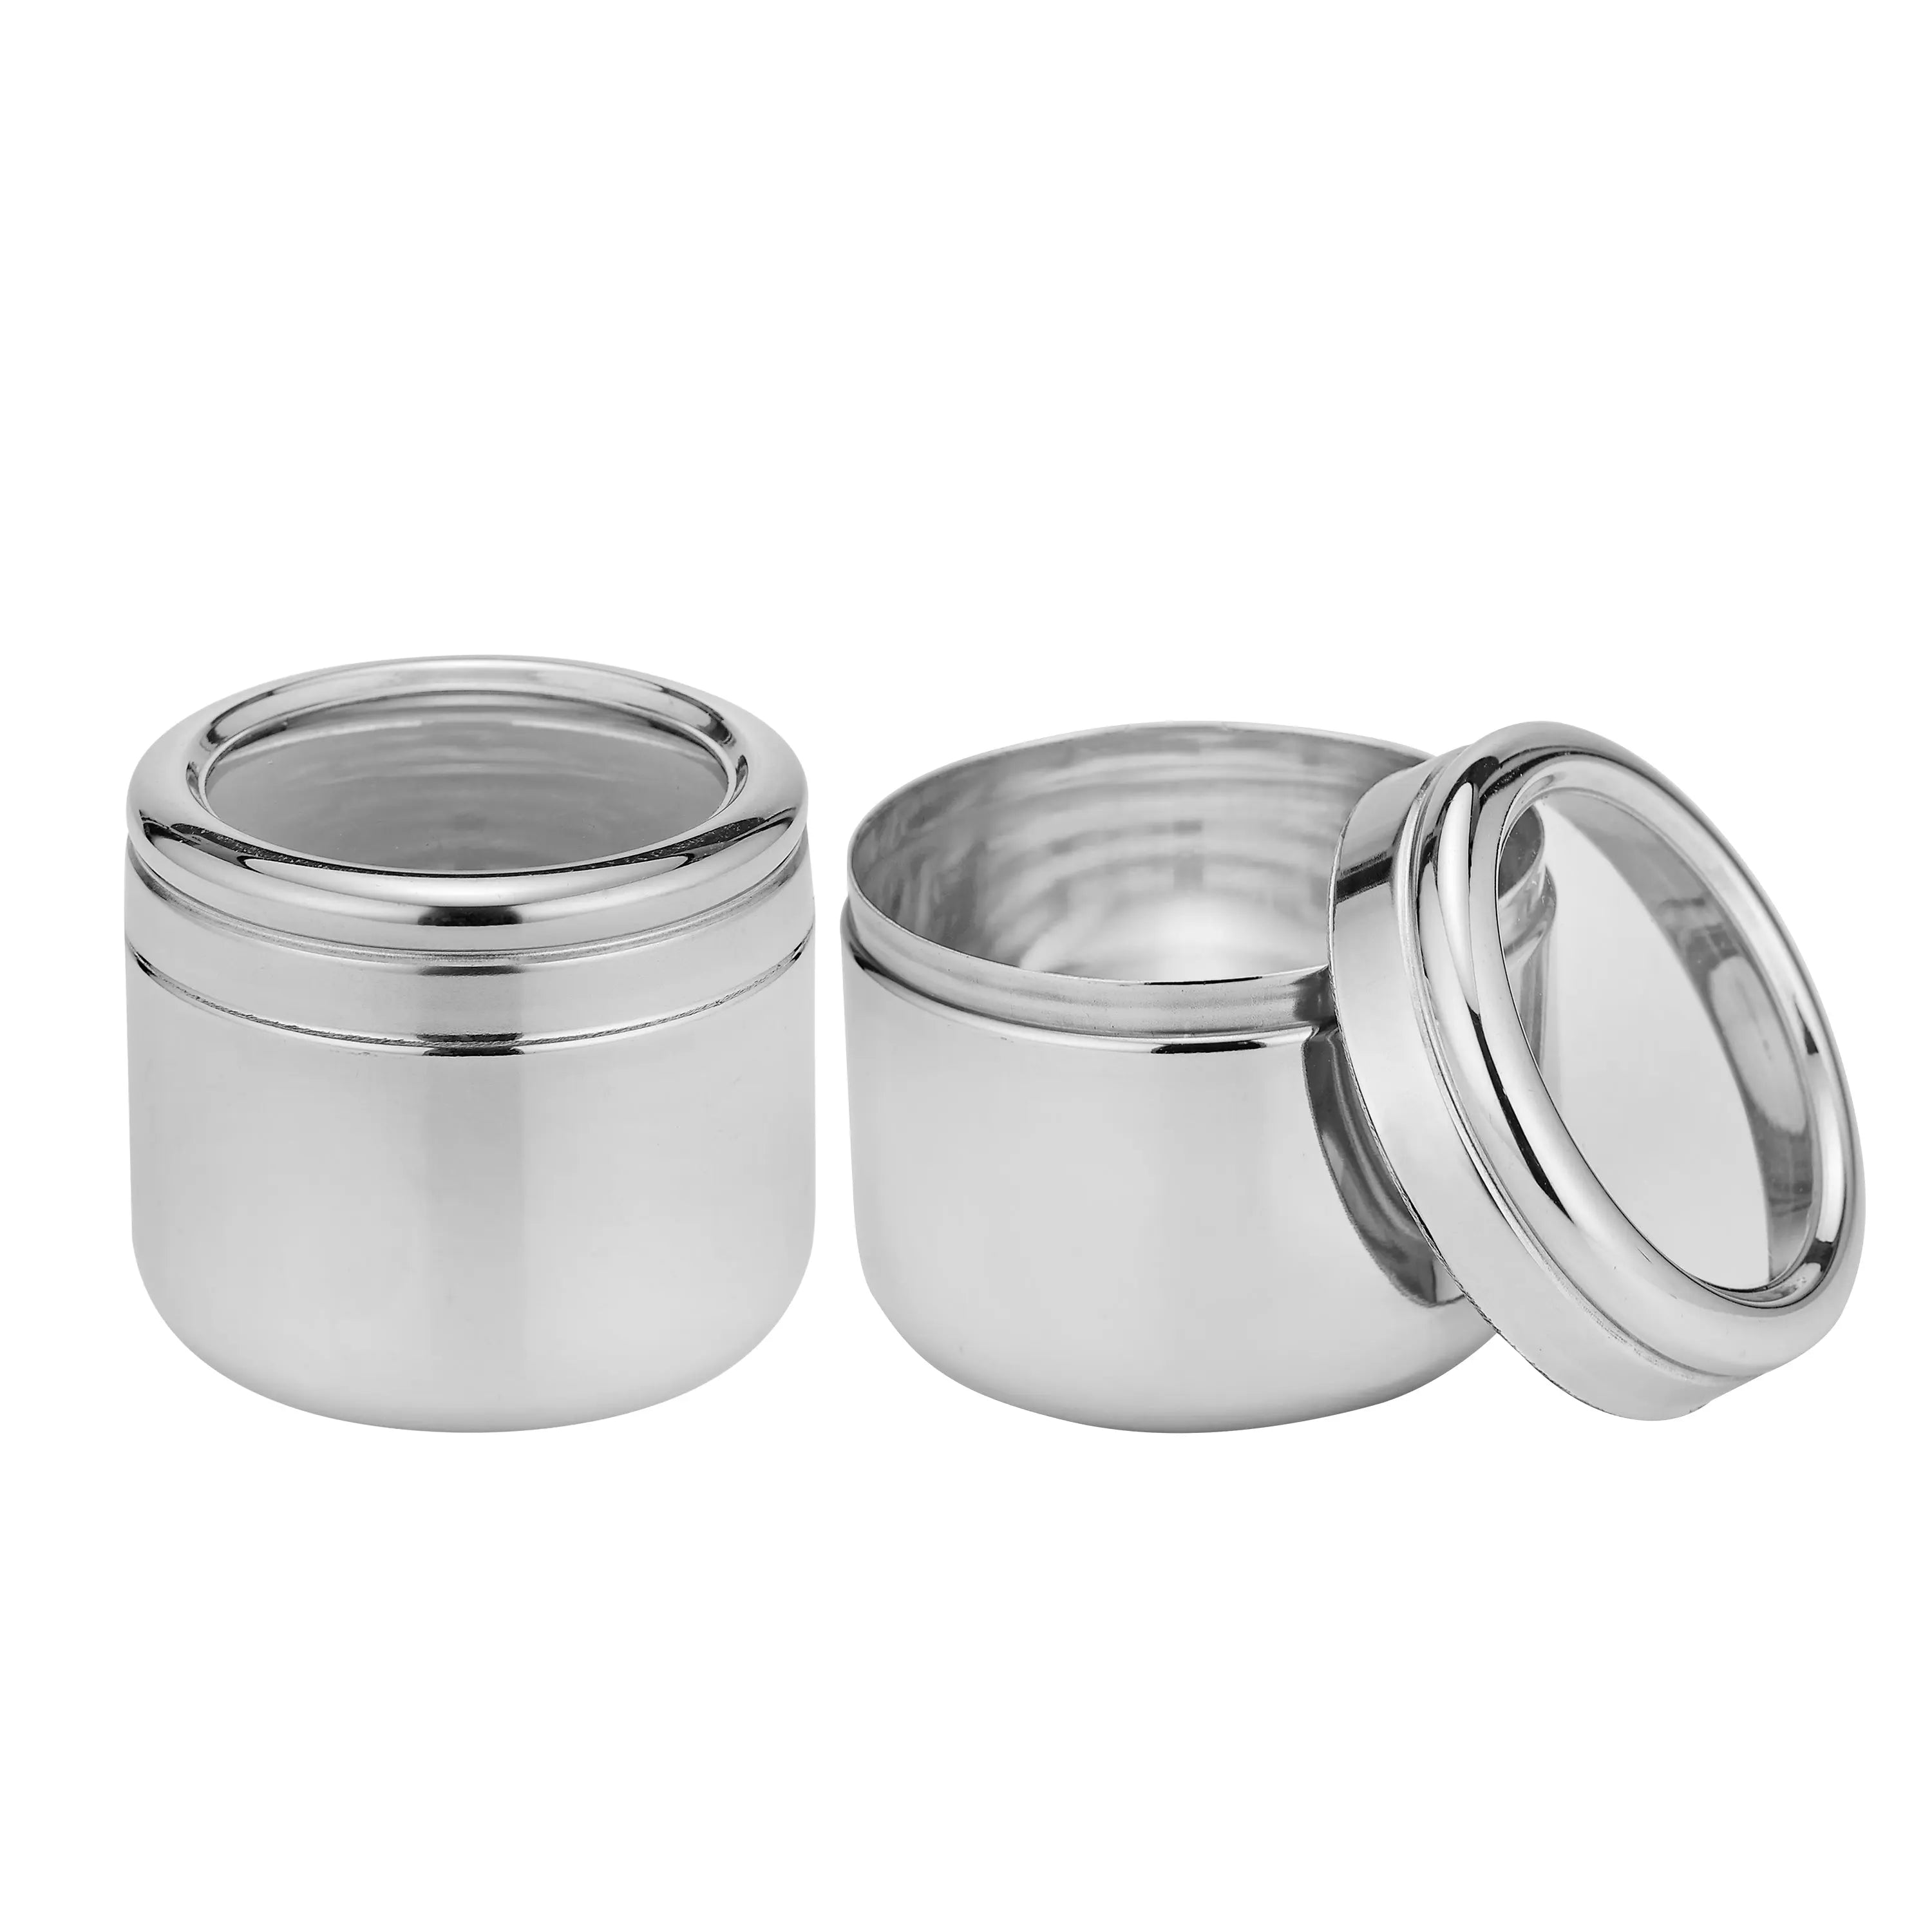 STAINLESS STEEL DIVINE DIBBI (FOR SPICE) - CROCKERY WALA AND COMPANY 